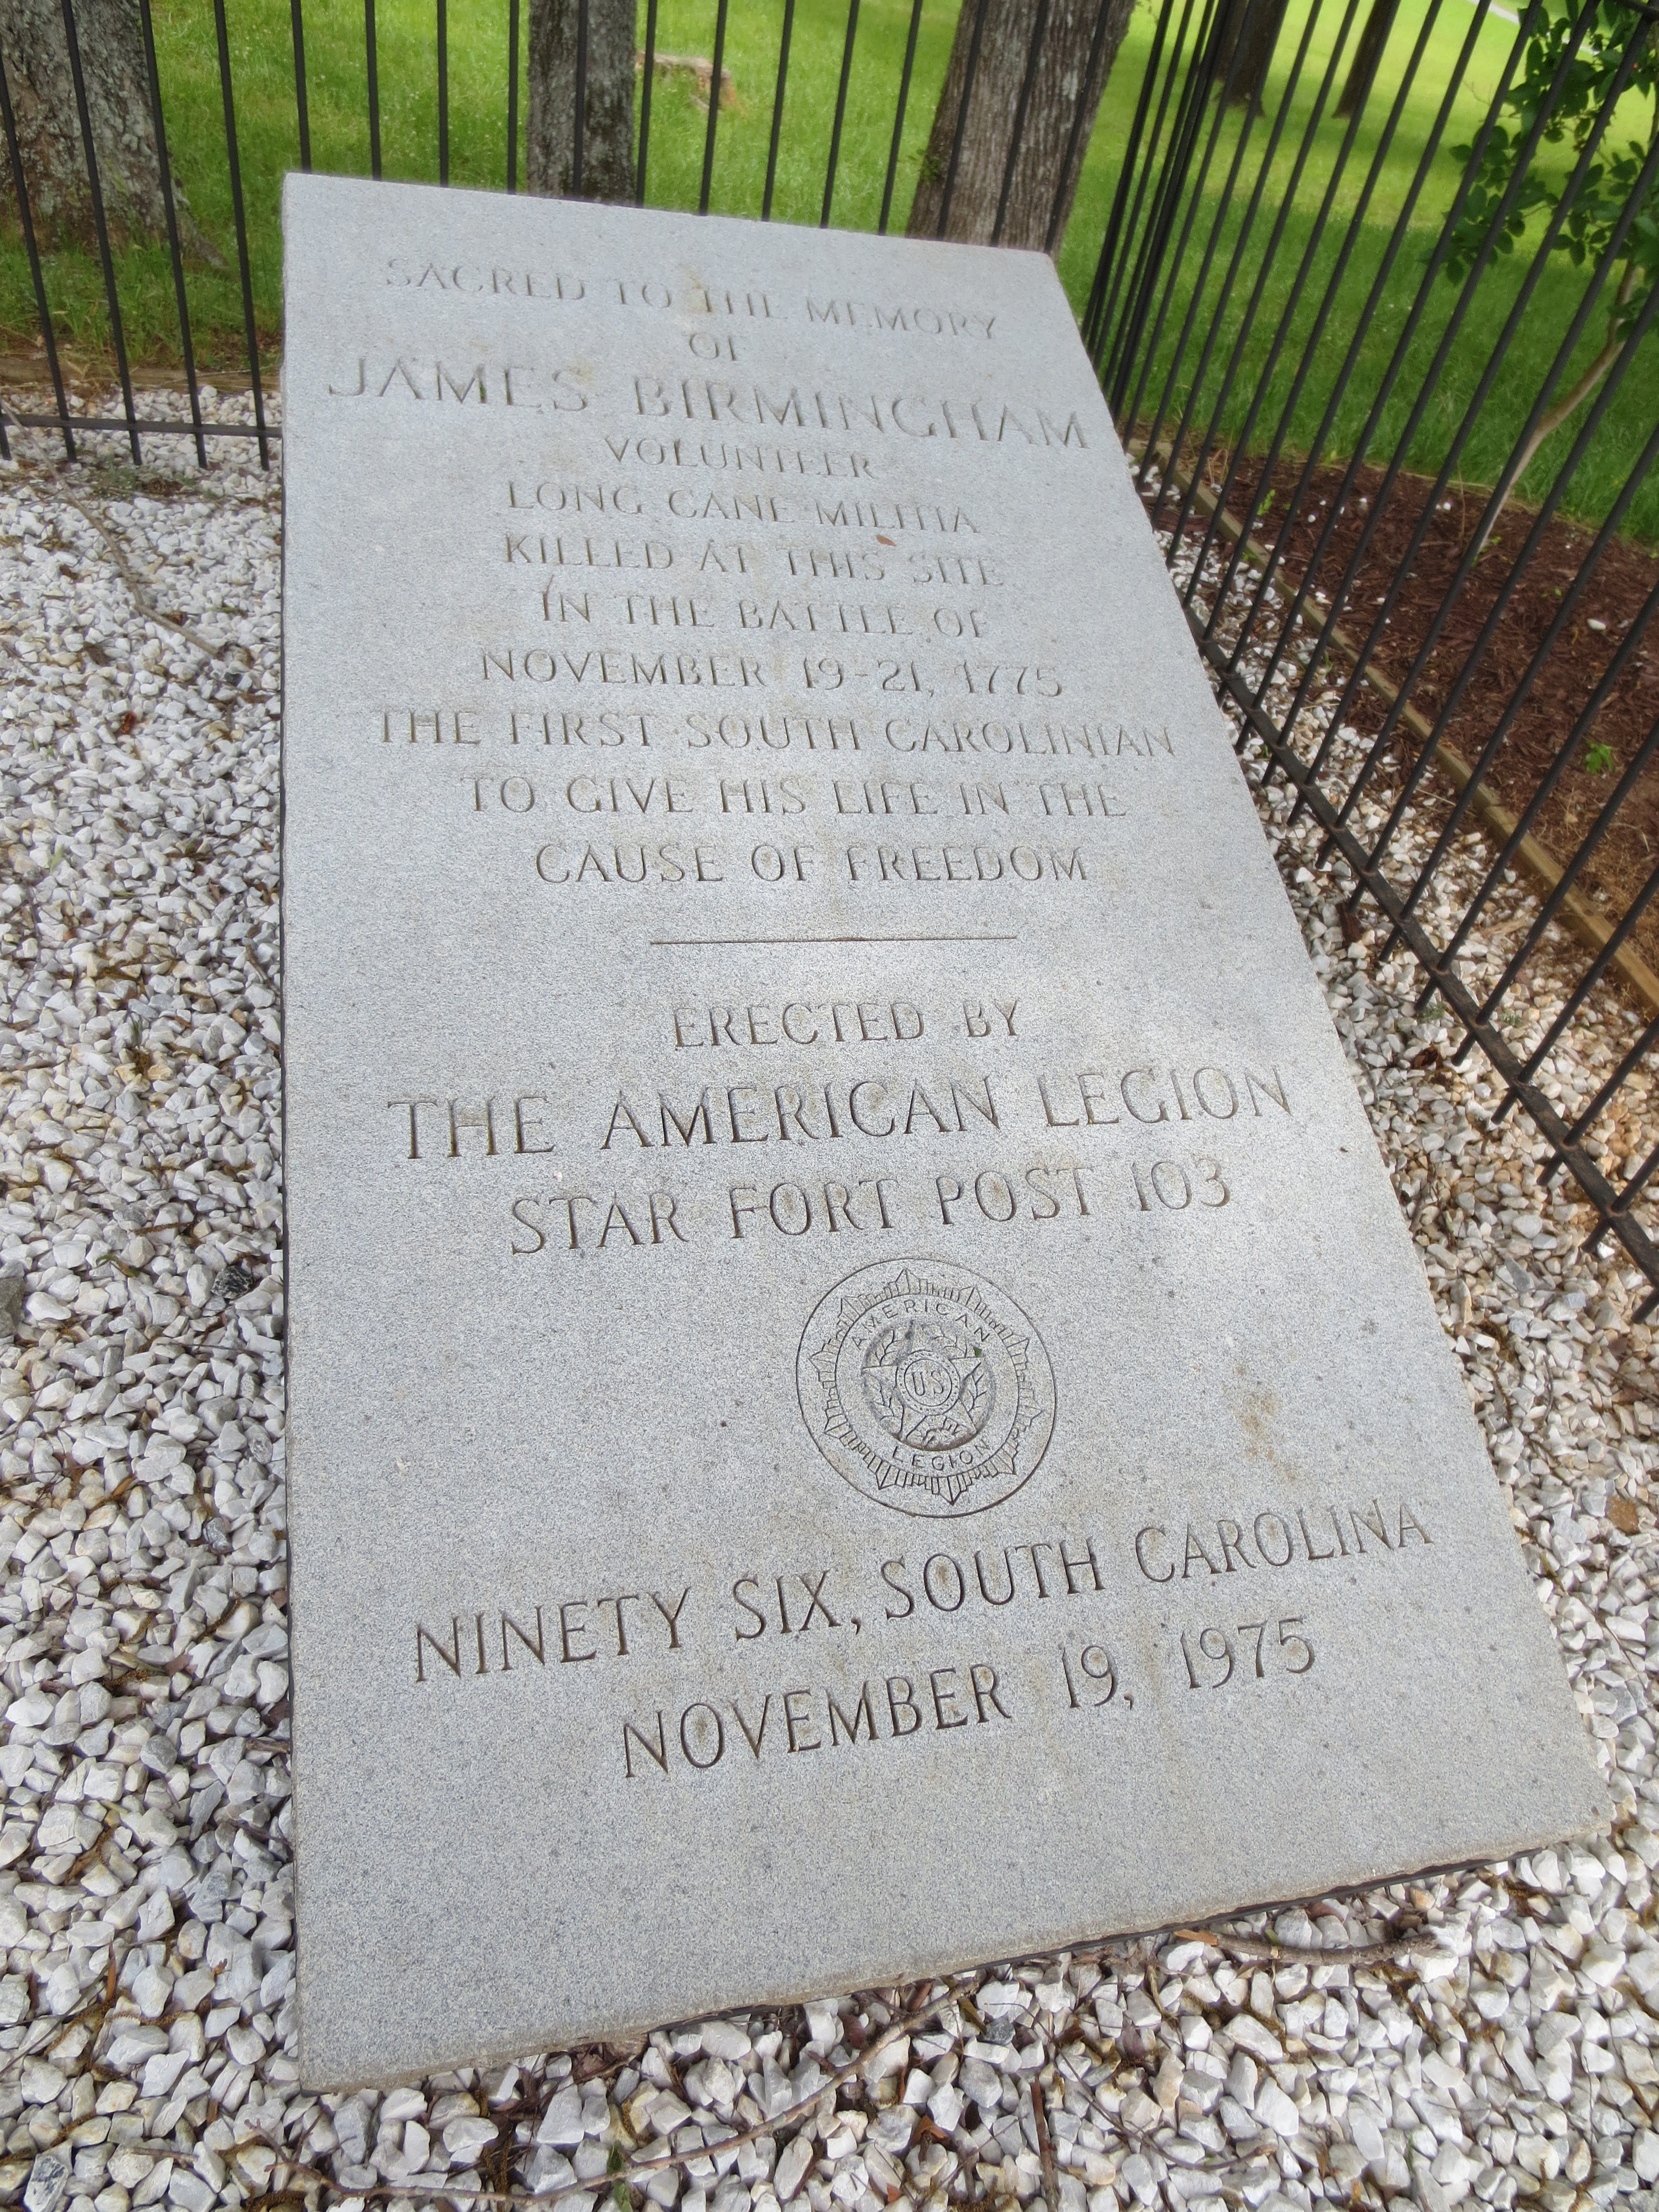 A monument to James Birmingham, the first South Carolinian to die in the American Revolution